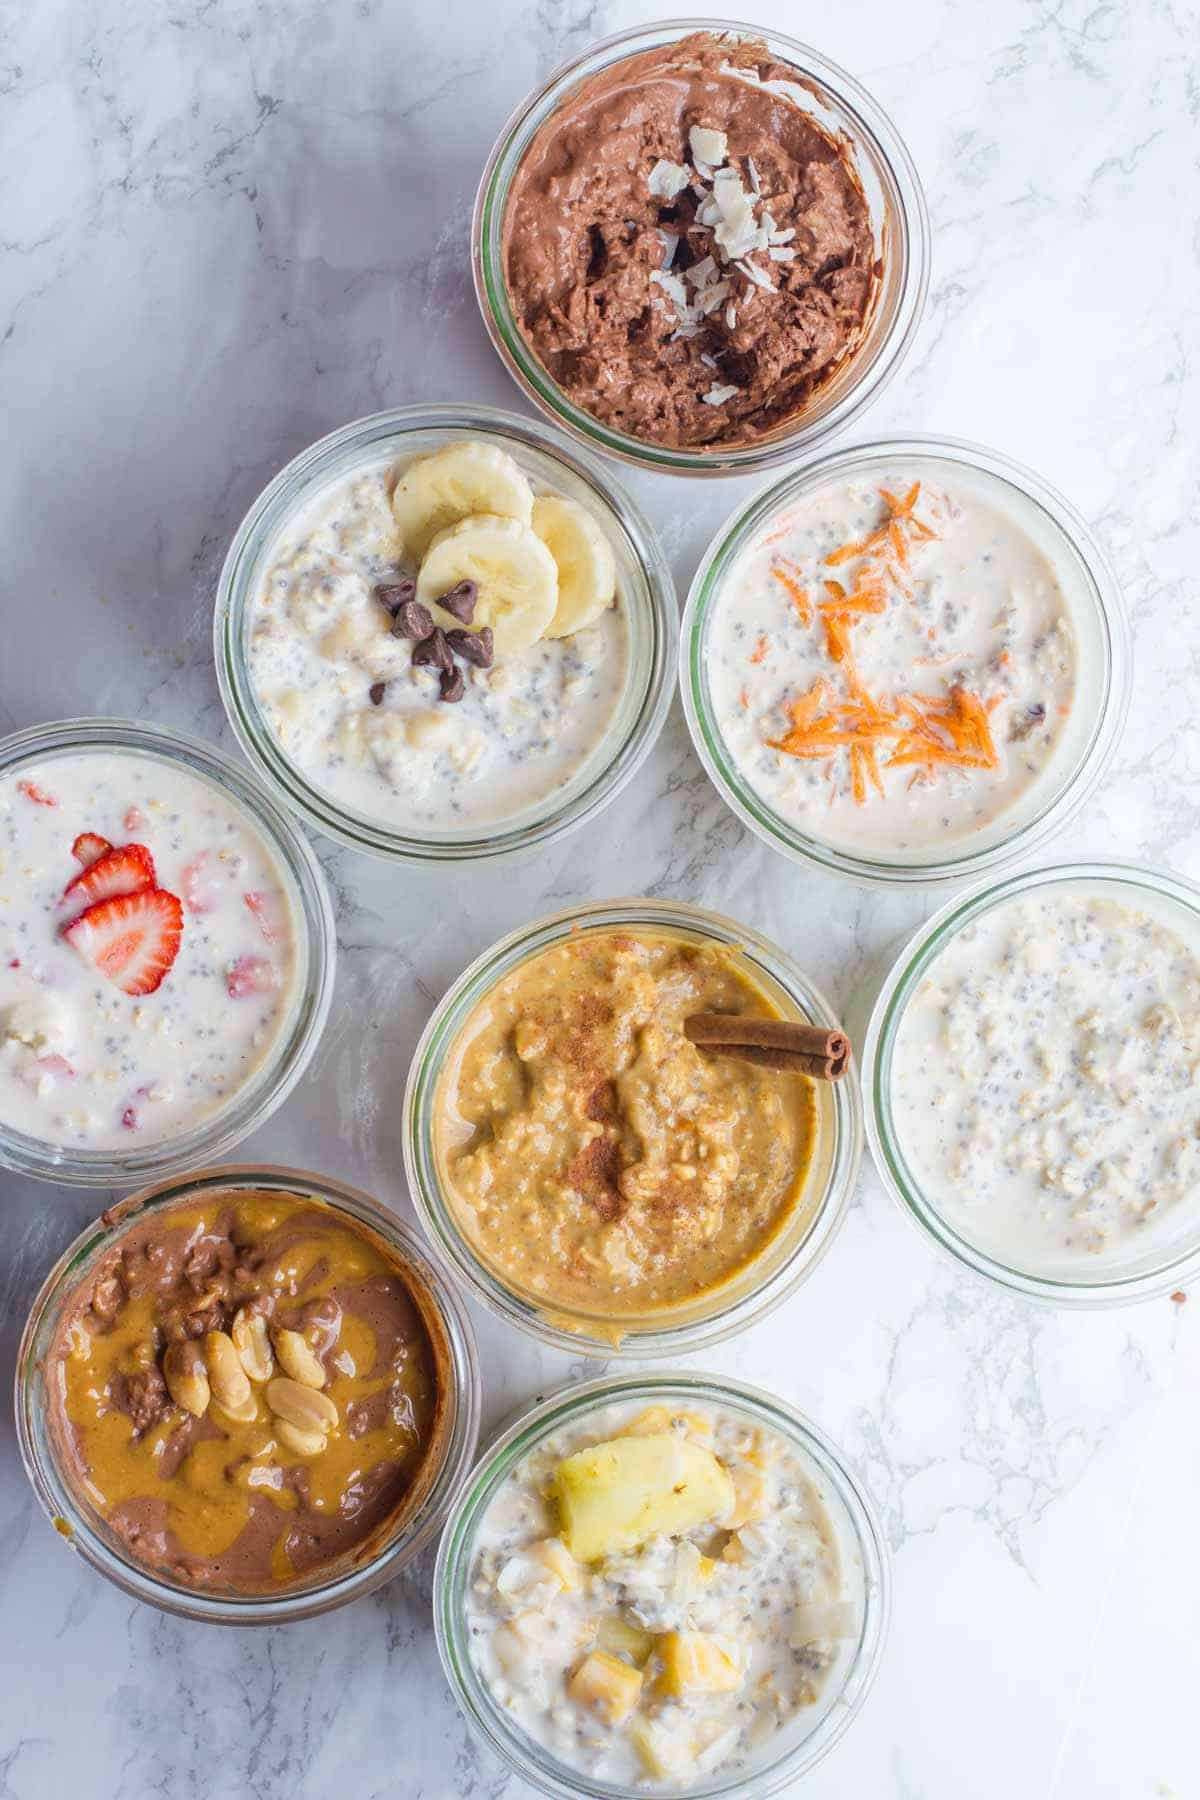 Healthy Overnight Oats Recipes
 8 Classic Overnight Oats Recipes You Should Try Wholefully